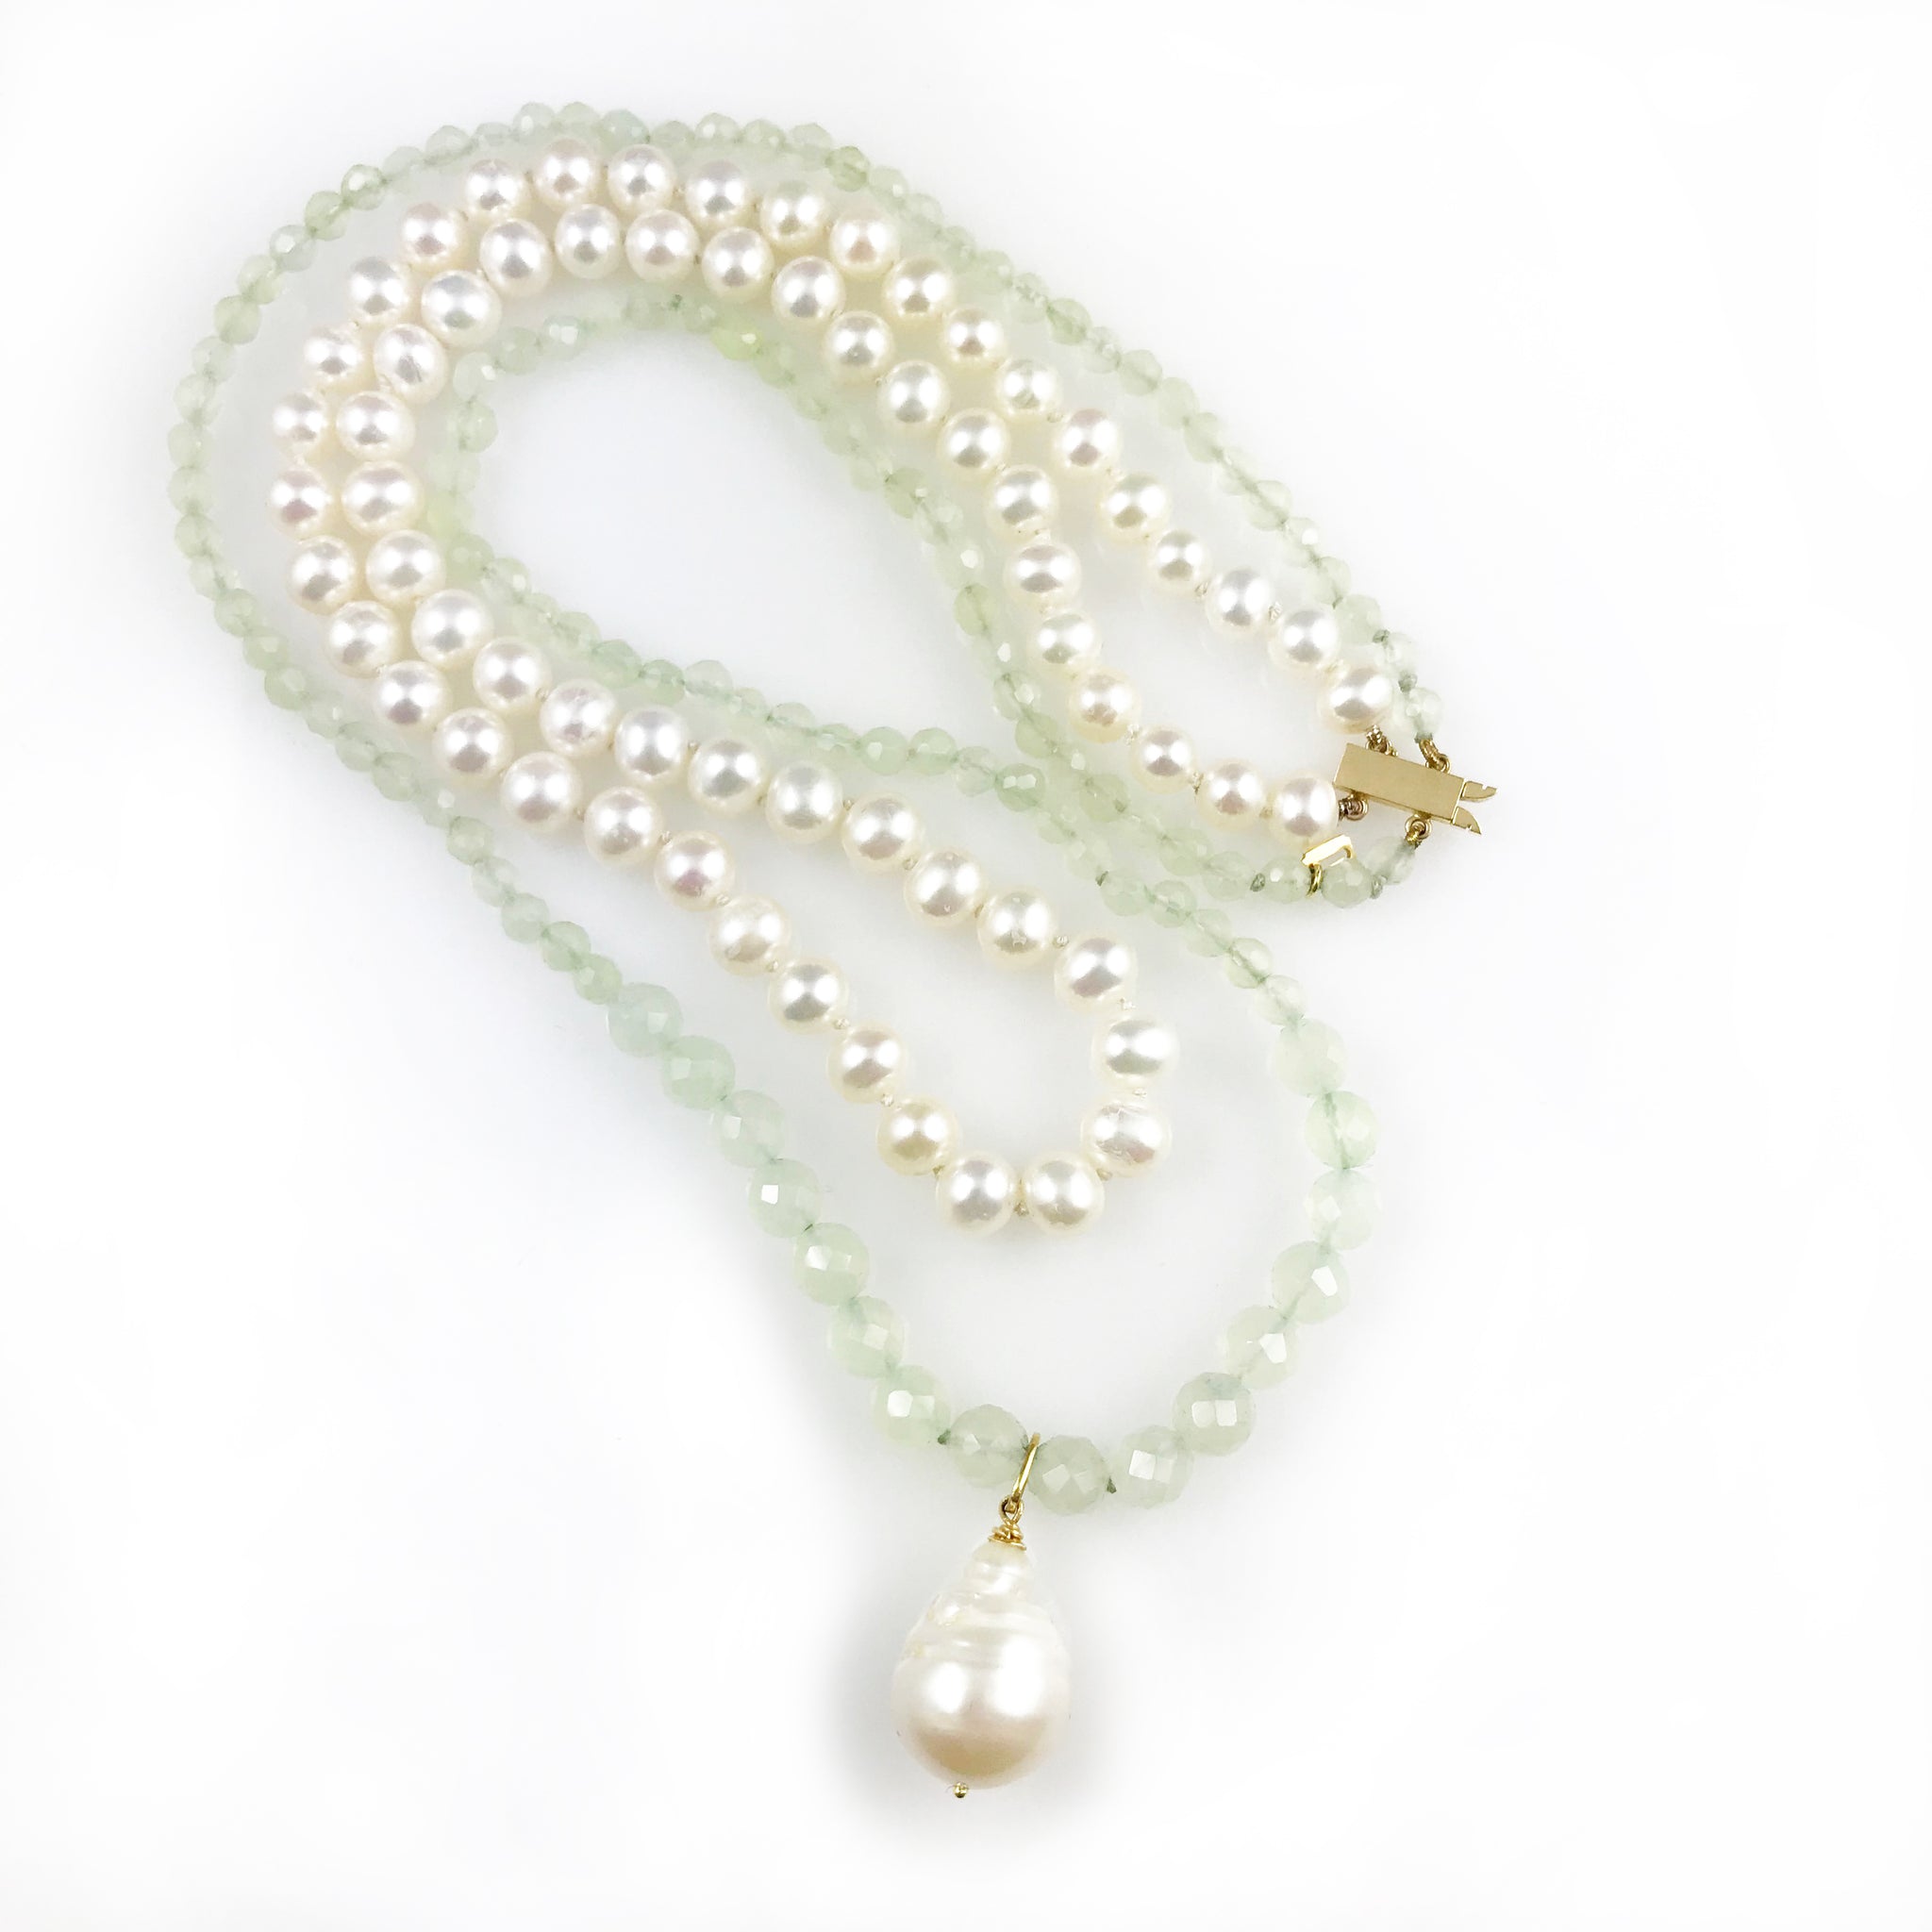 'Pearl Wonder' - Pearl necklace and green quartz with 18ct gold clasp